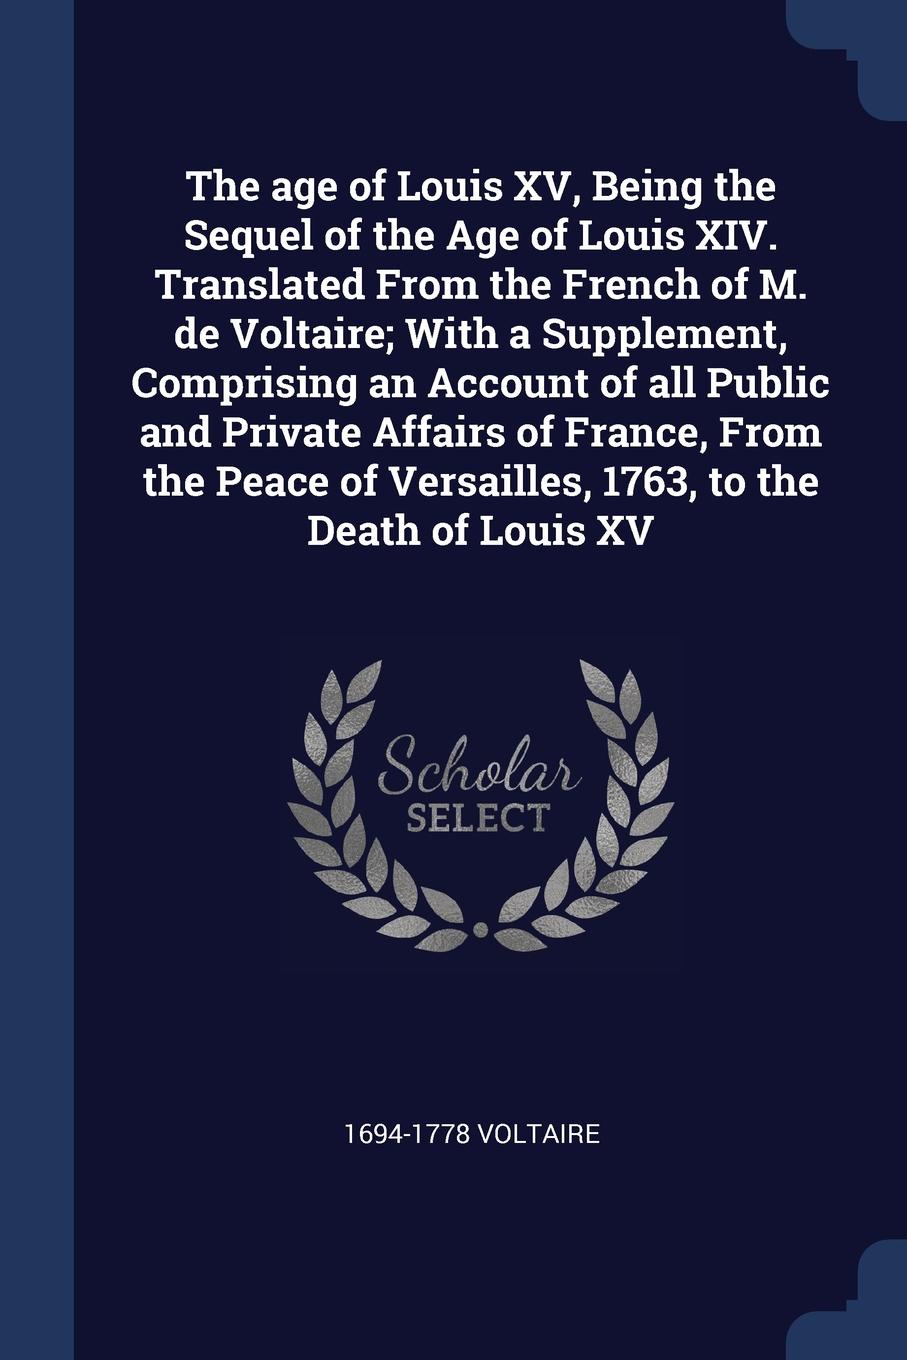 The age of Louis XV, Being the Sequel of the Age of Louis XIV. Translated From the French of M. de Voltaire; With a Supplement, Comprising an Account of all Public and Private Affairs of France, From the Peace of Versailles, 1763, to the Death of ...